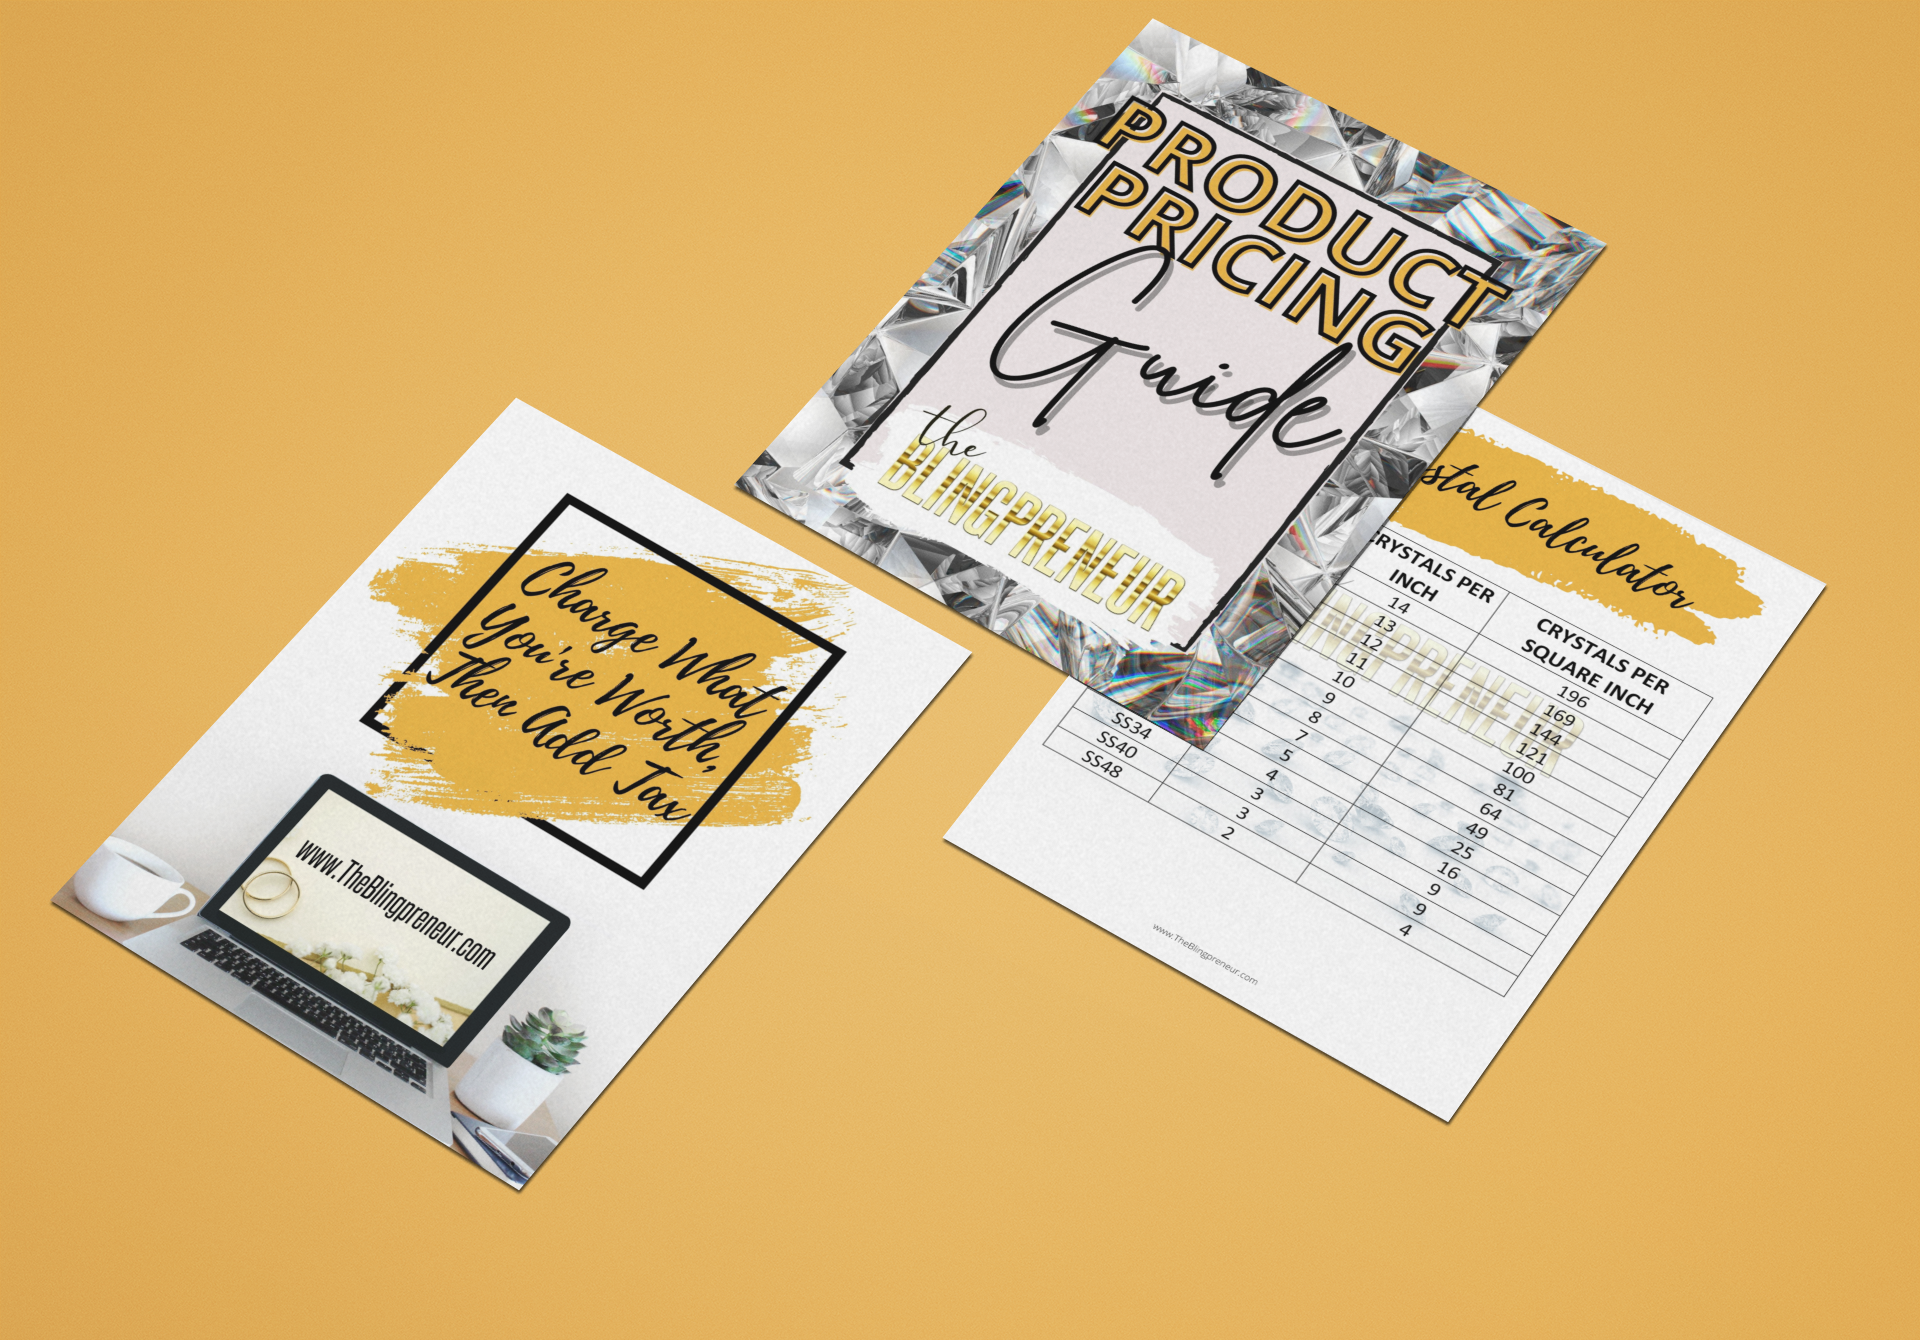 The Bling Book and Business Planner